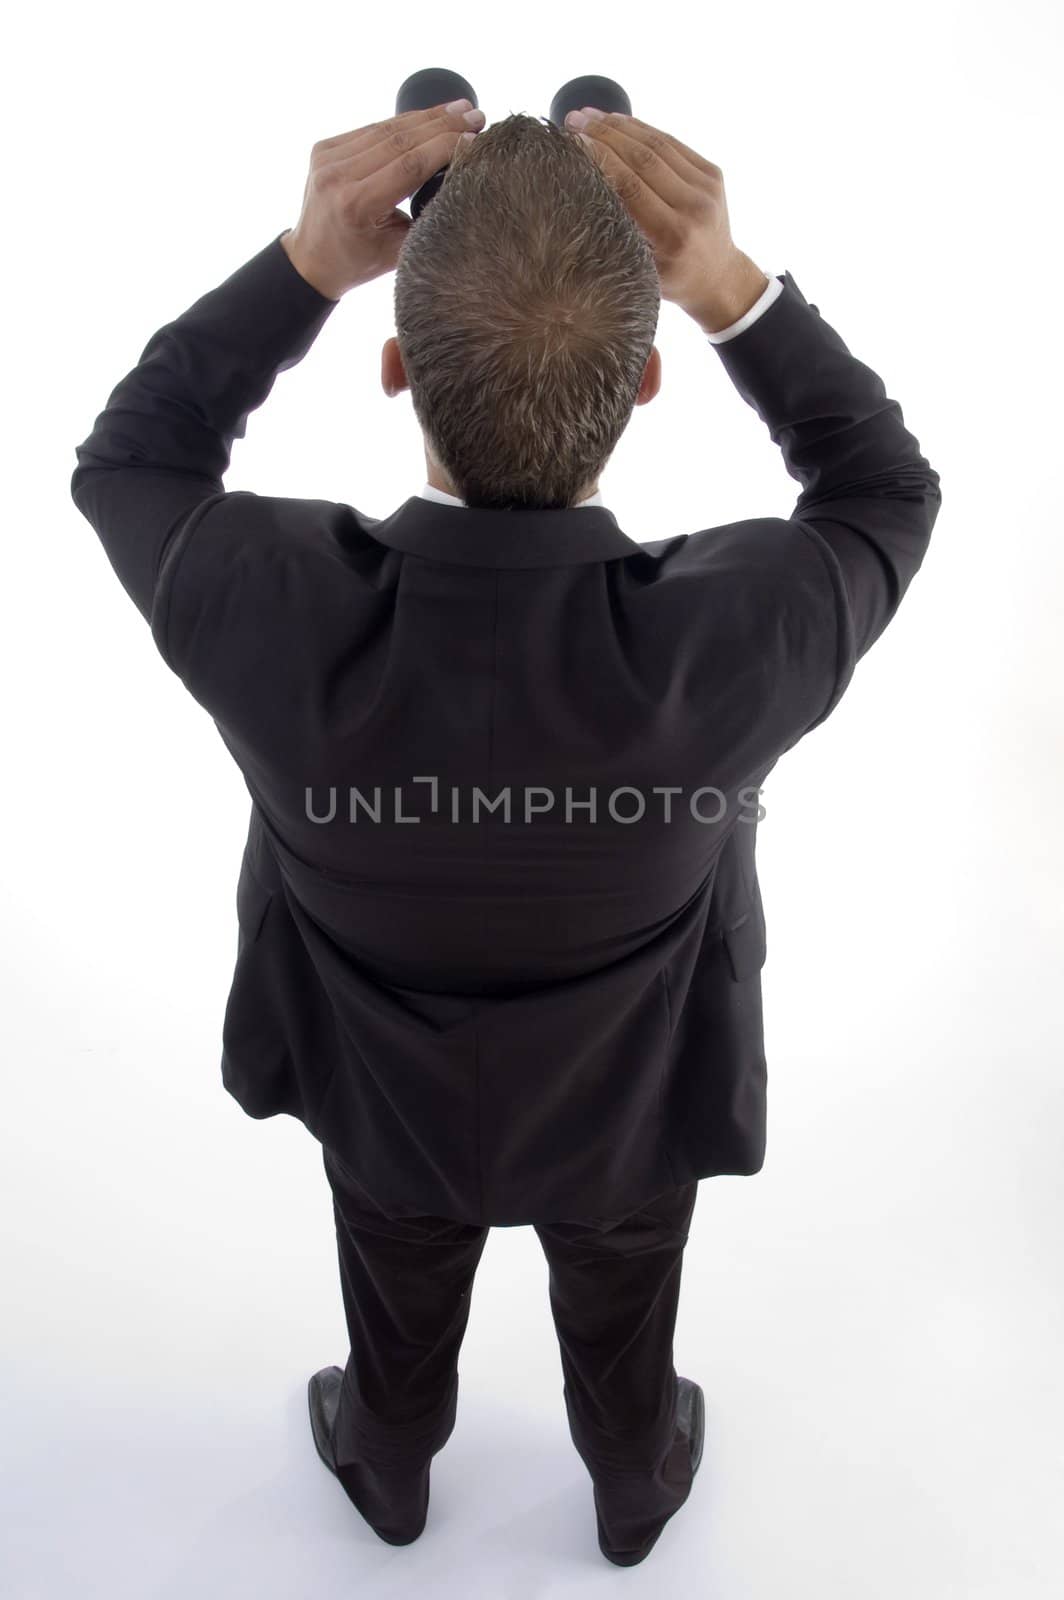 smart young lawyer viewing through binoculars on an isolated white background